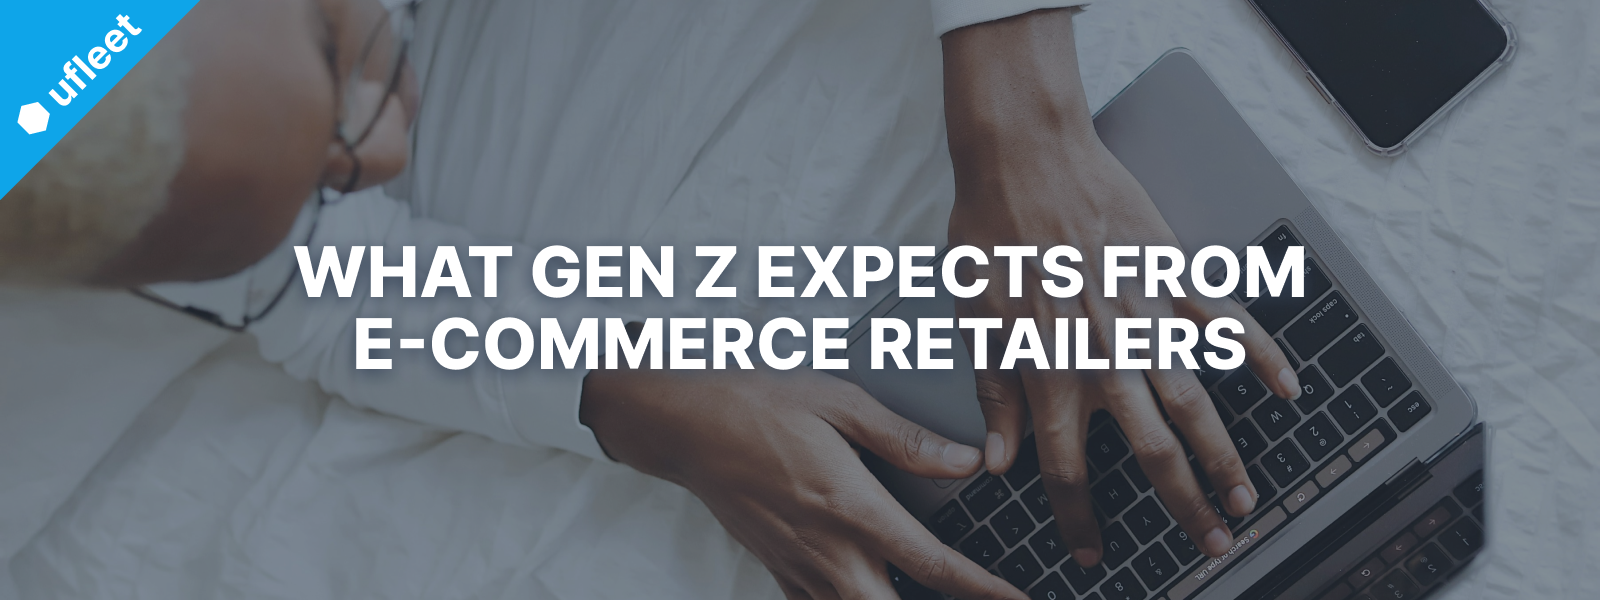 gen z expects from e-commerce